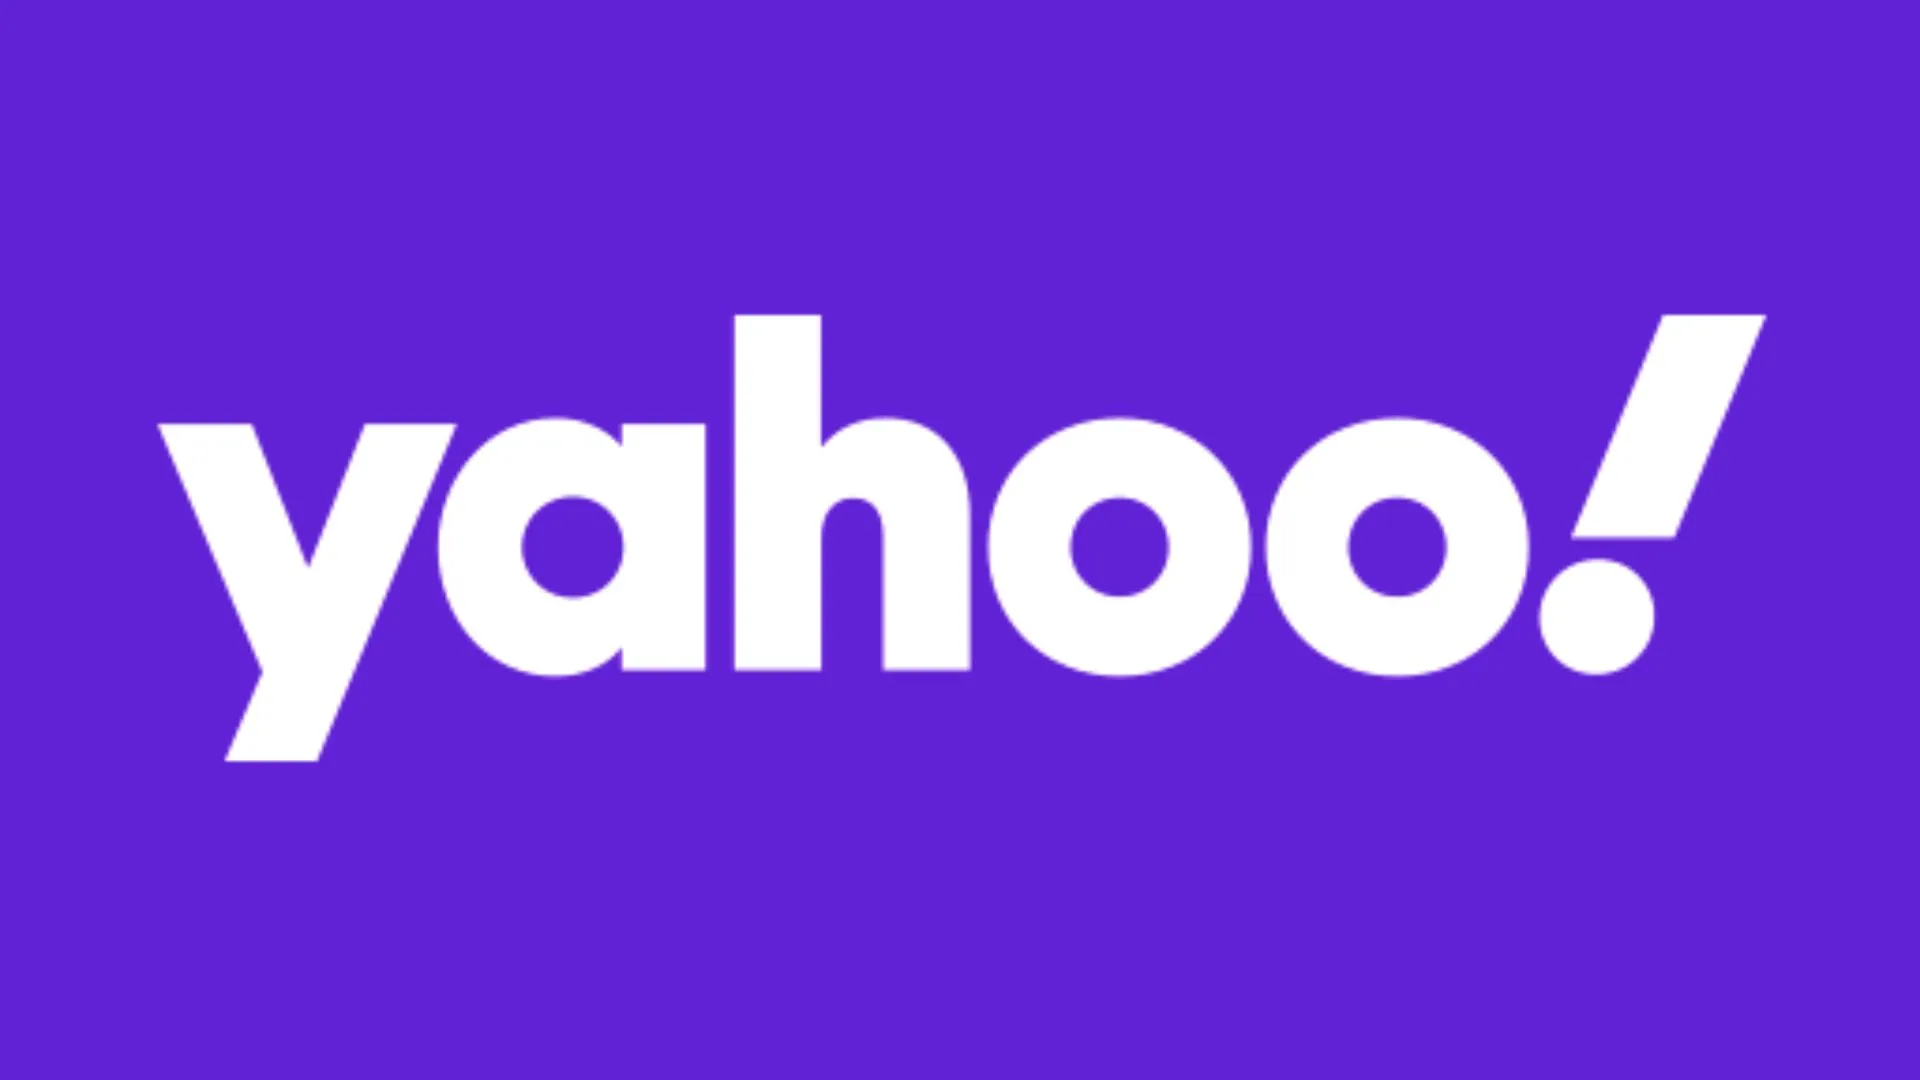 Who is the Owner of Yahoo